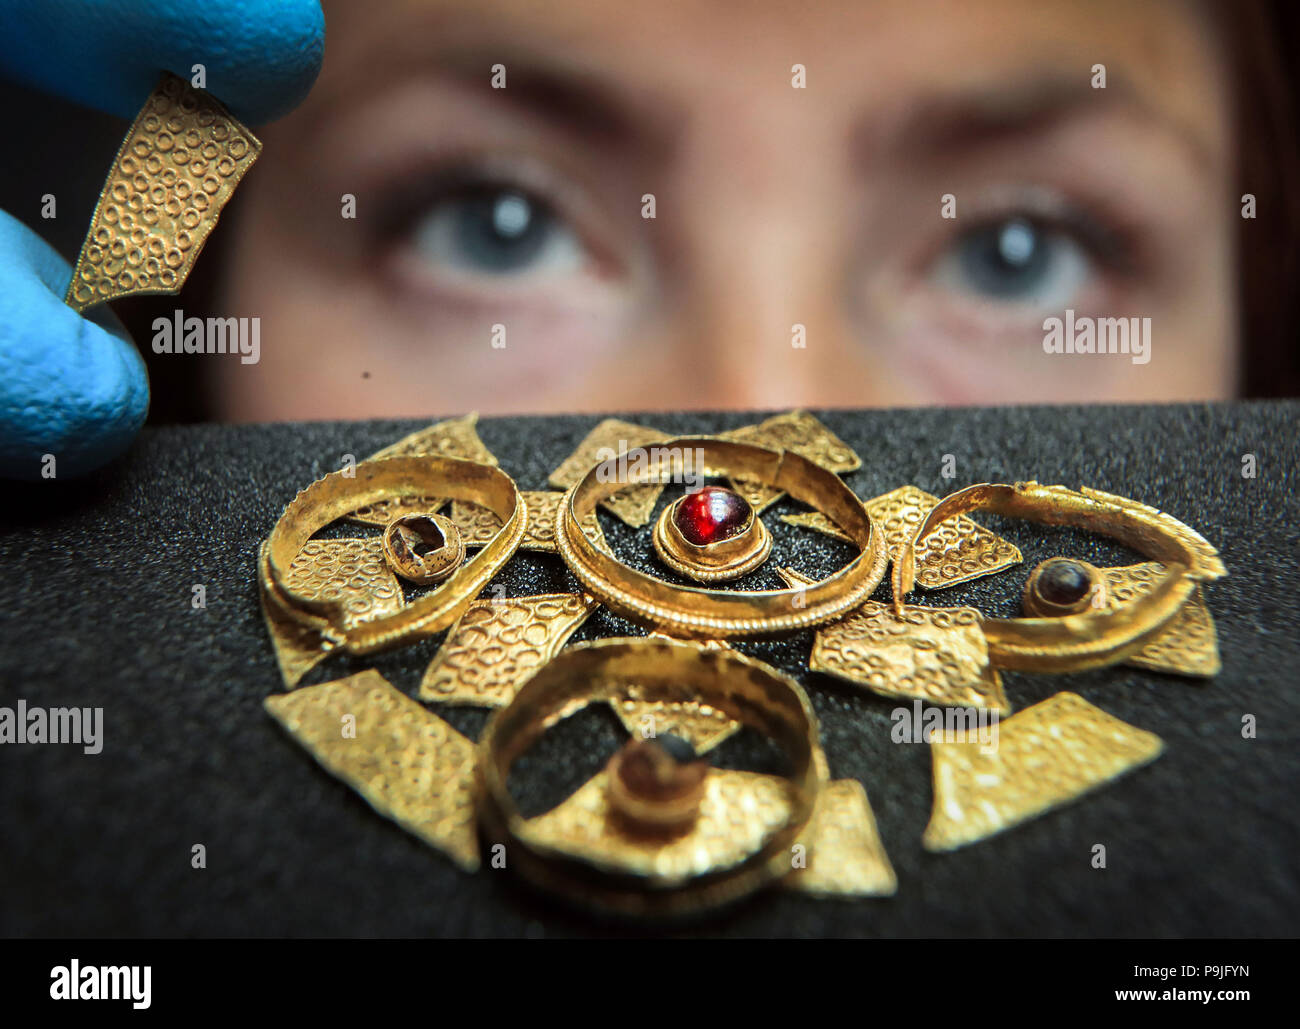 Curator of Archaeology Lucy Creighton with an seventh century Anglo-Saxon disc brooch, believed to have come from the burial of a noblewoman, that has recently been acquired by the Yorkshire Museum in York. Stock Photo